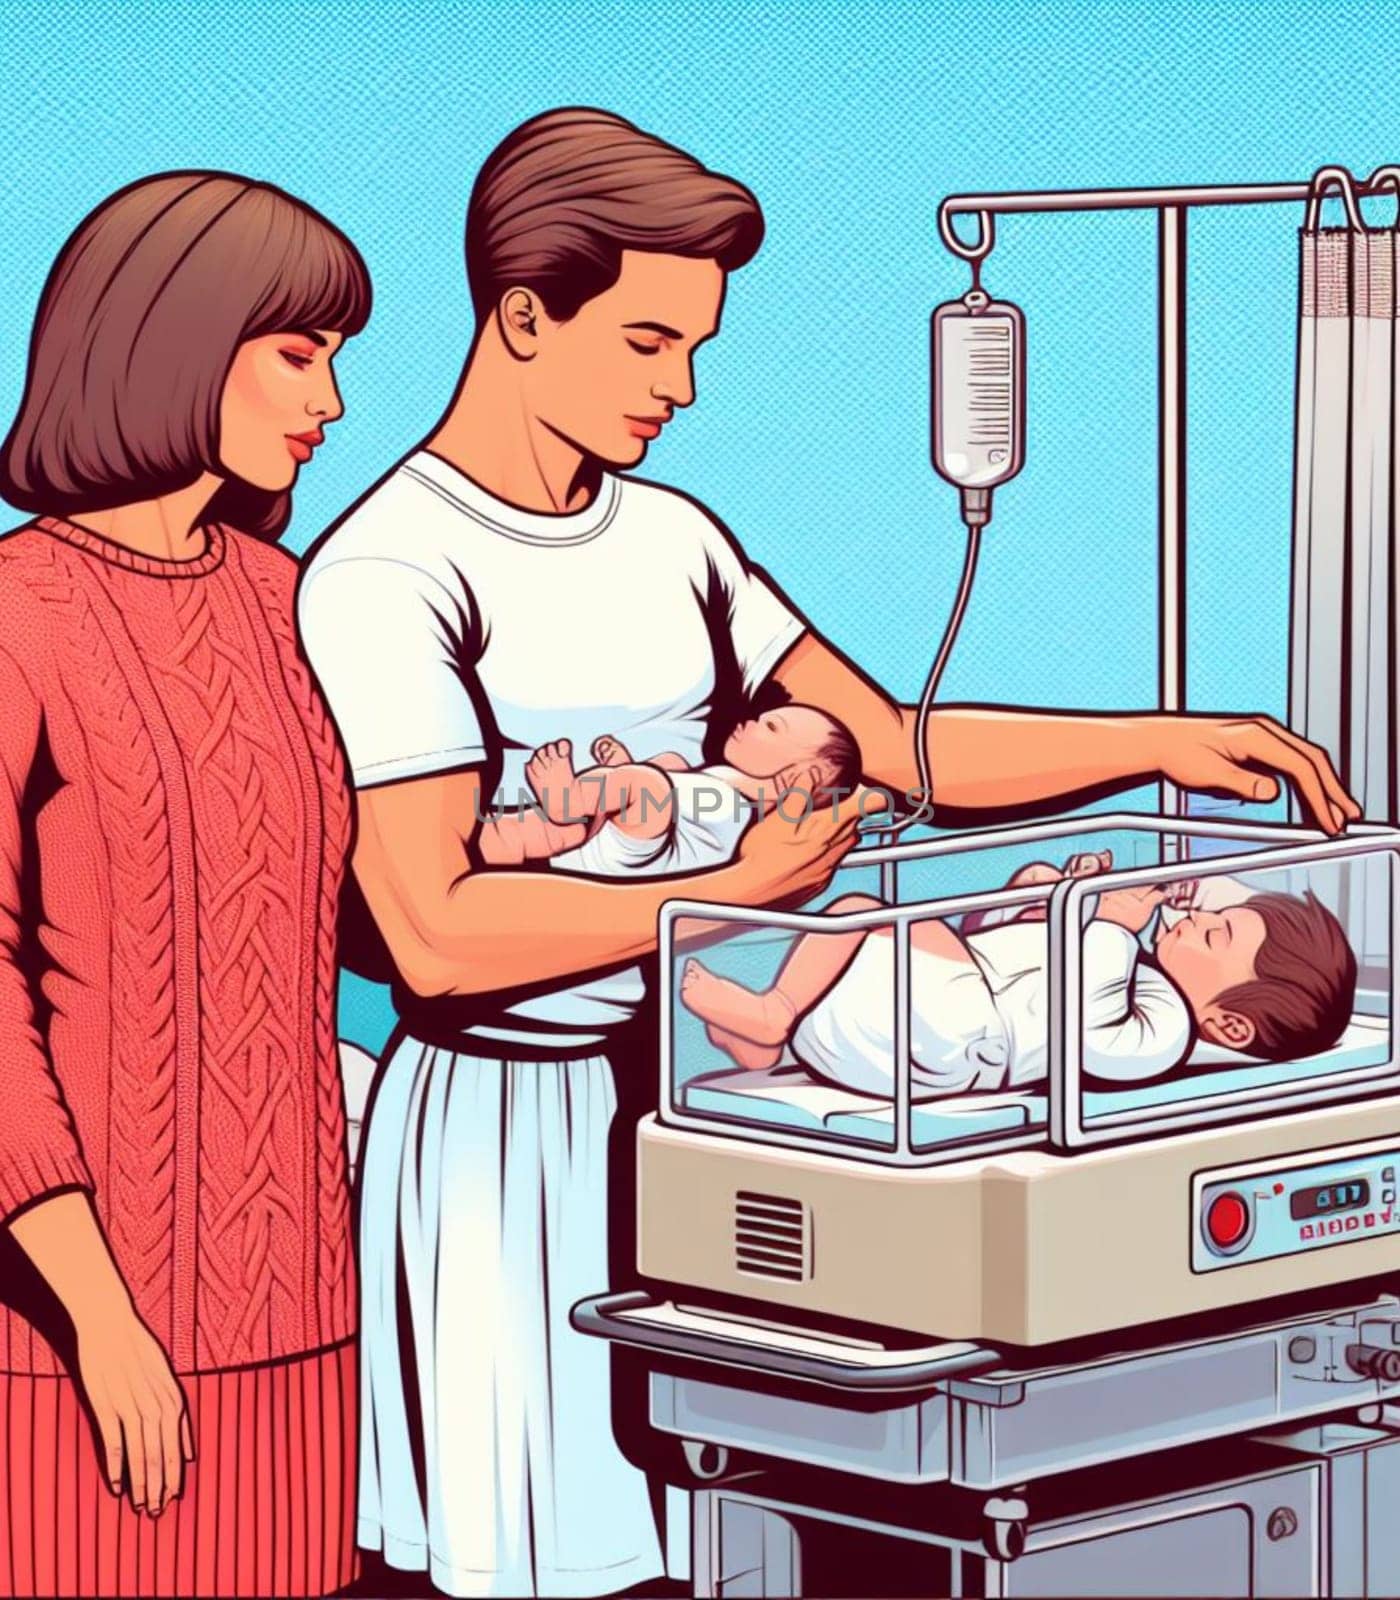 illustration depicting medical staff people at the hospital take care of newborn baby by verbano